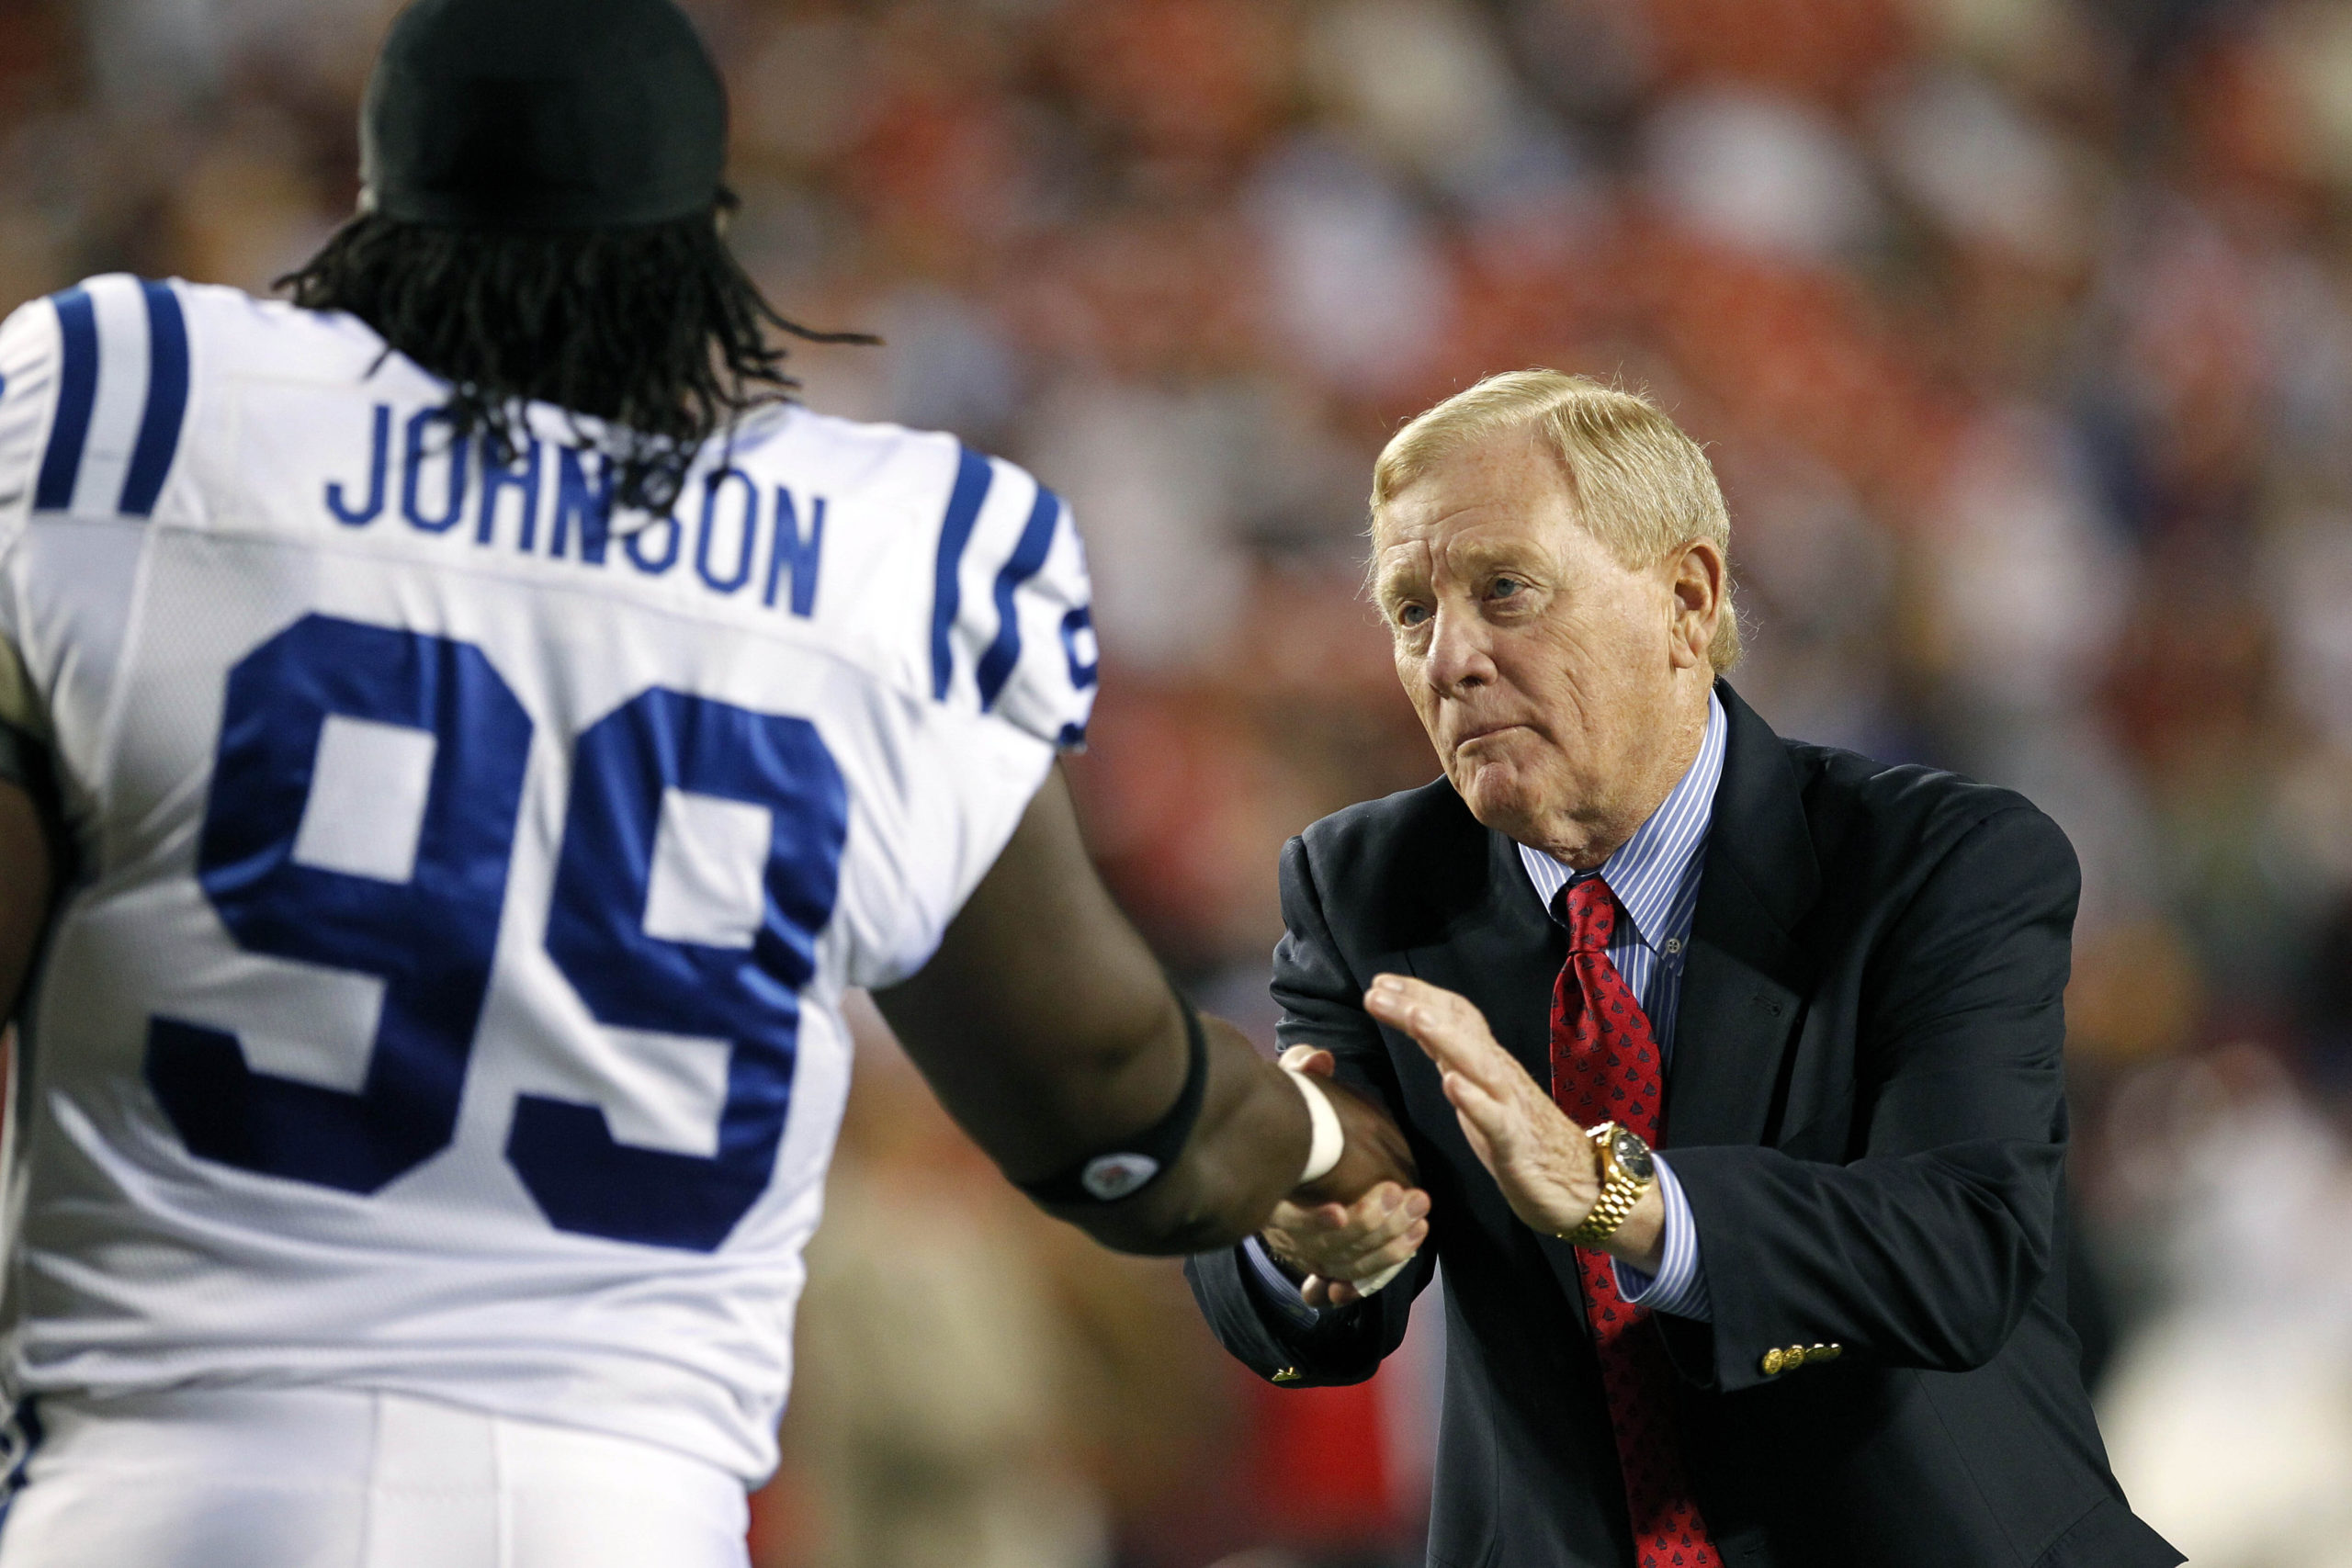 Bill Polian shaking hands with Colts player.